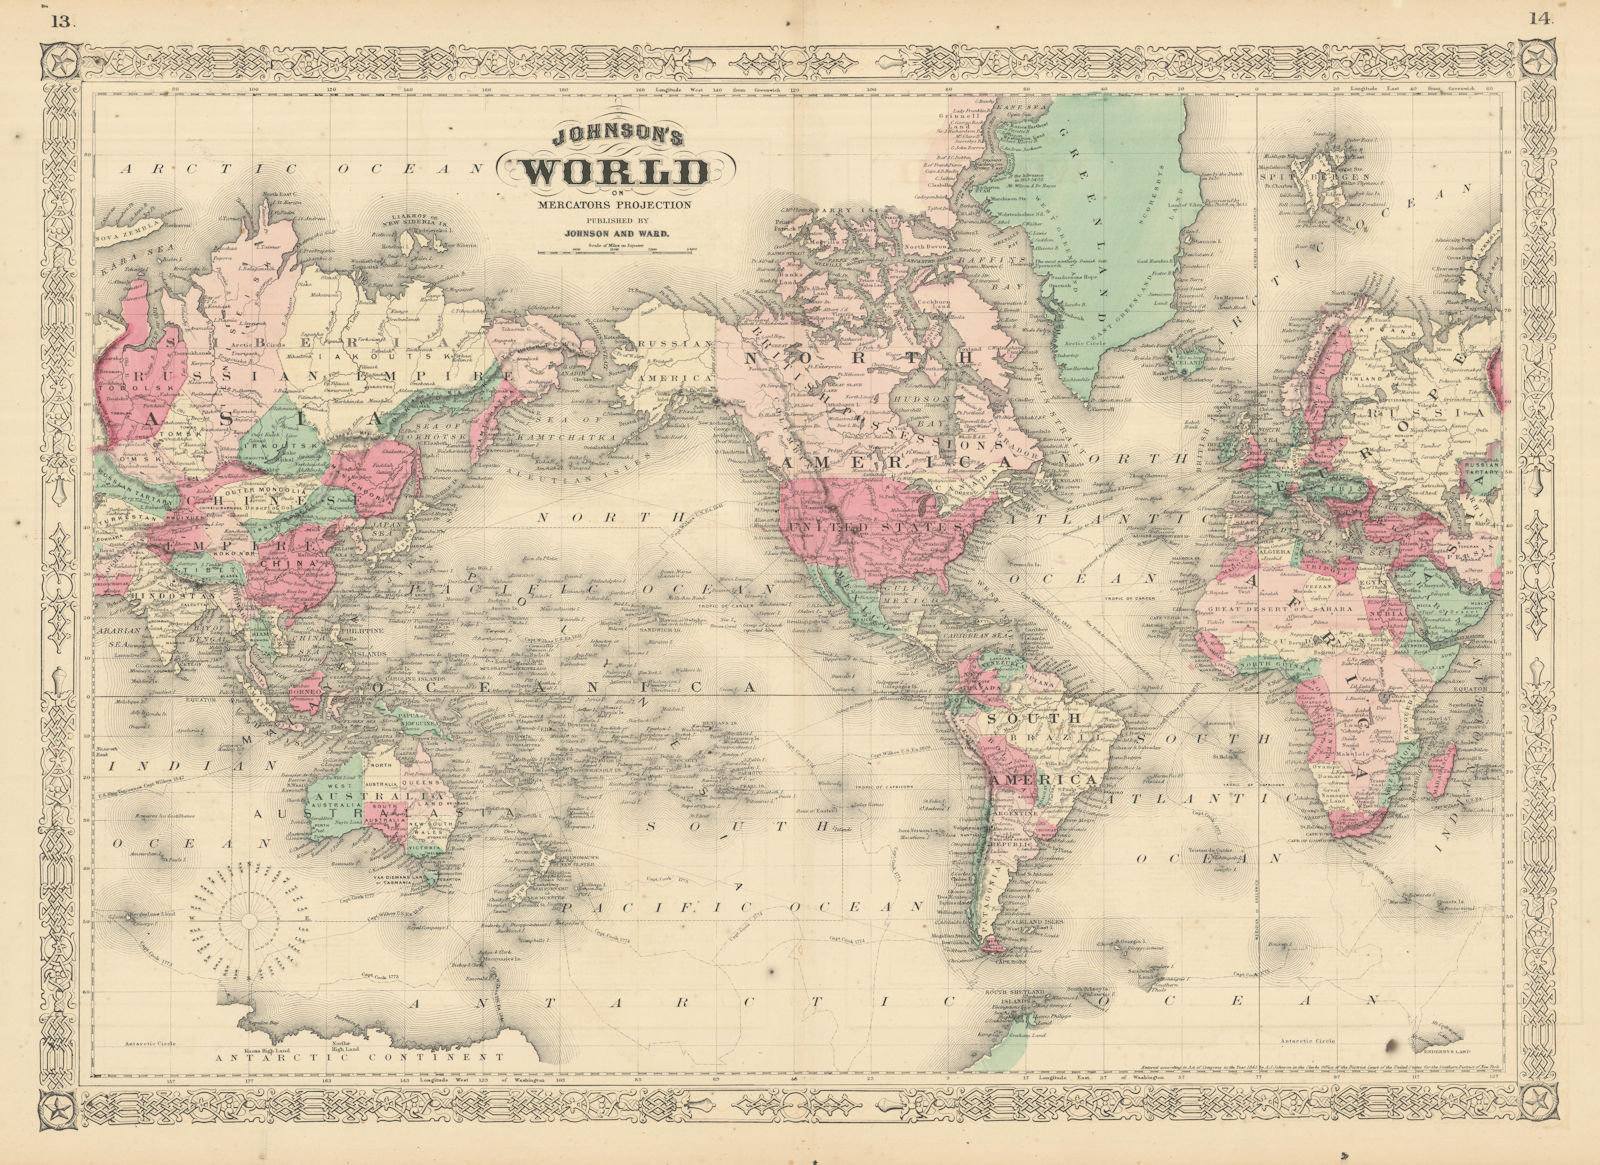 Associate Product Johnson's World on Mercator's Projection. Americas-centric 1866 old map